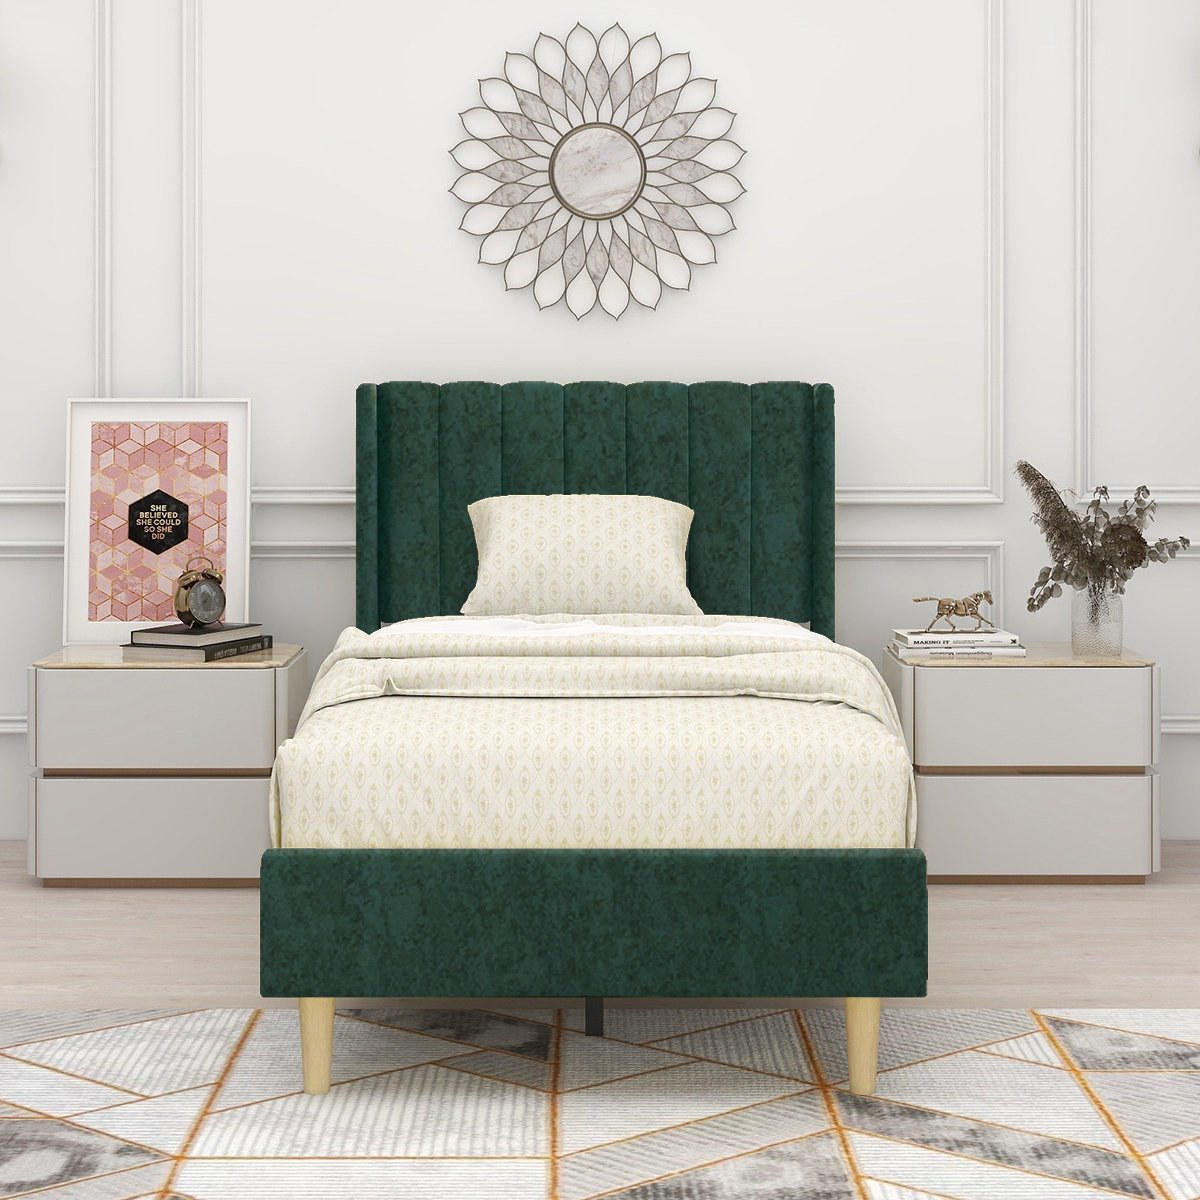 bed with a green upholstered bed frame